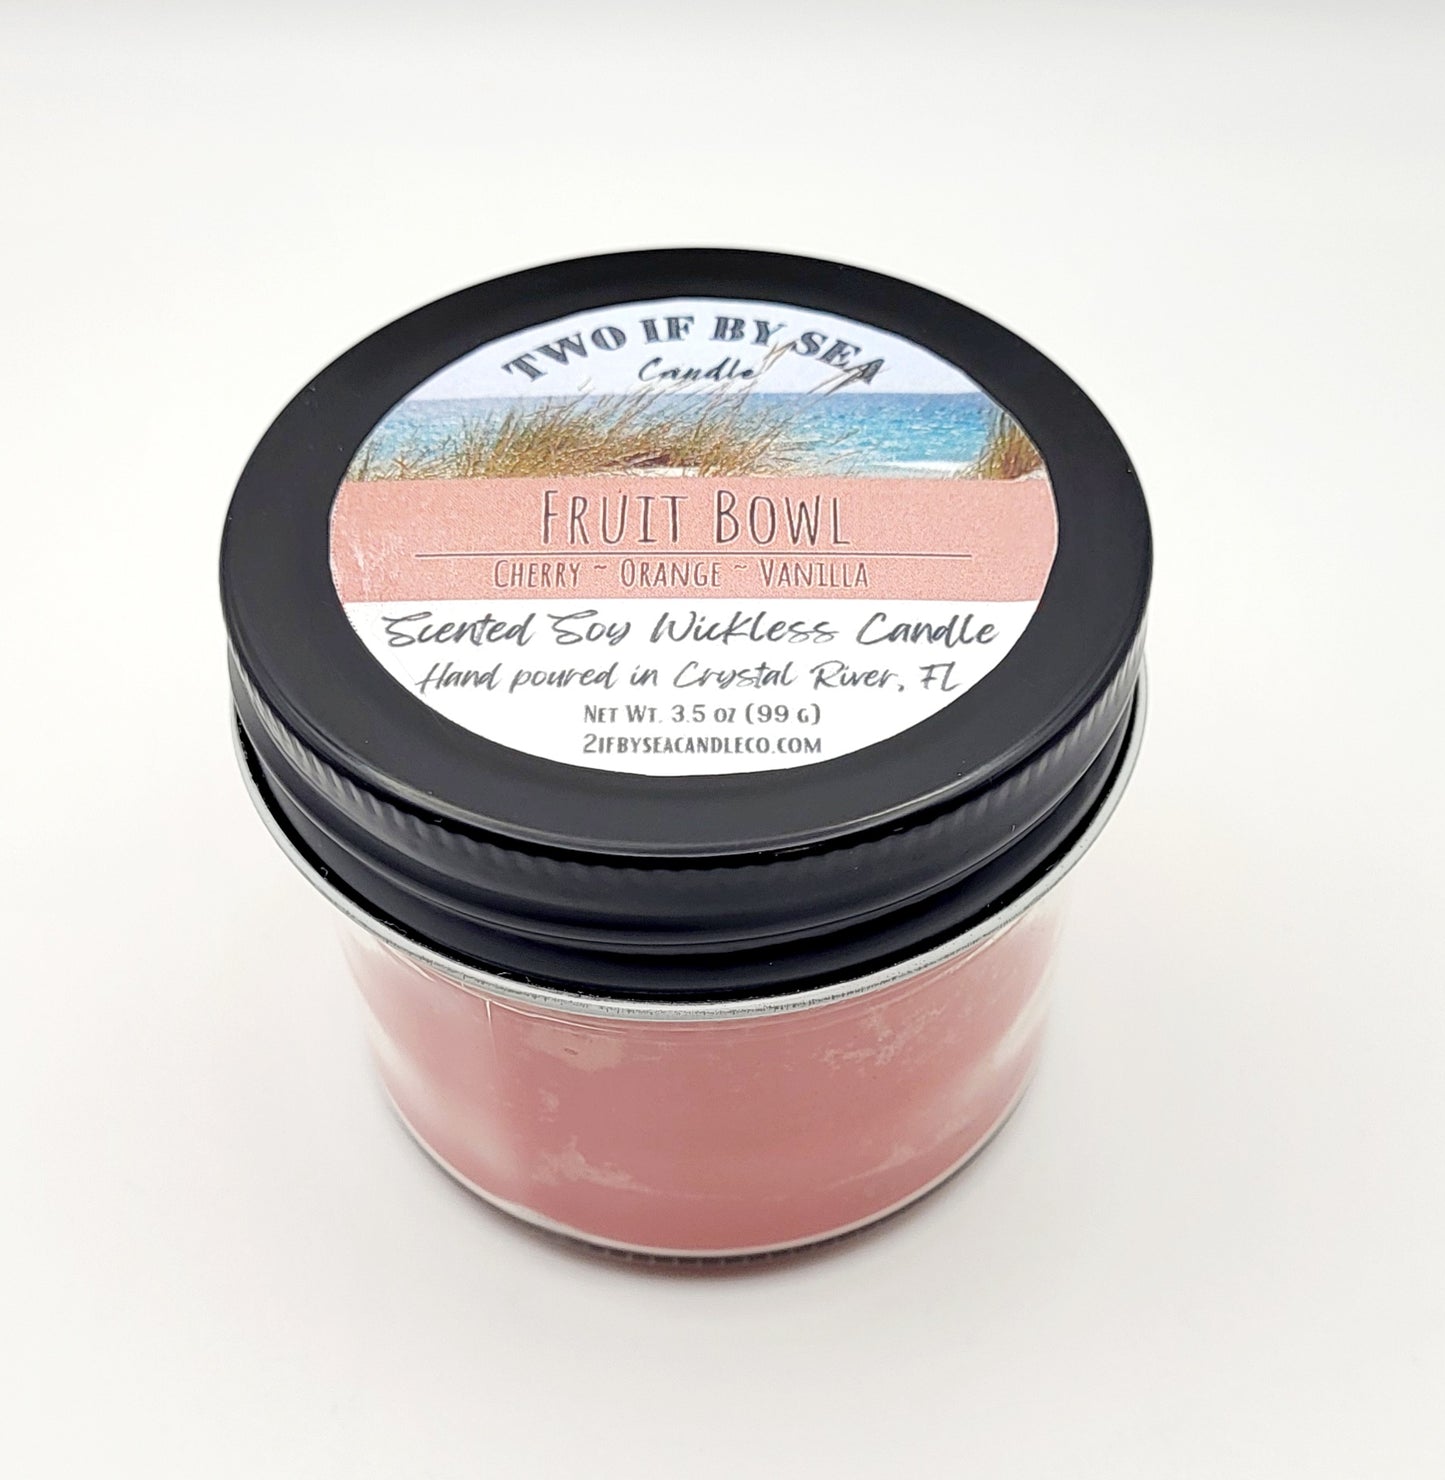 Fruit Bowl Scented Soy/Coconut Candle